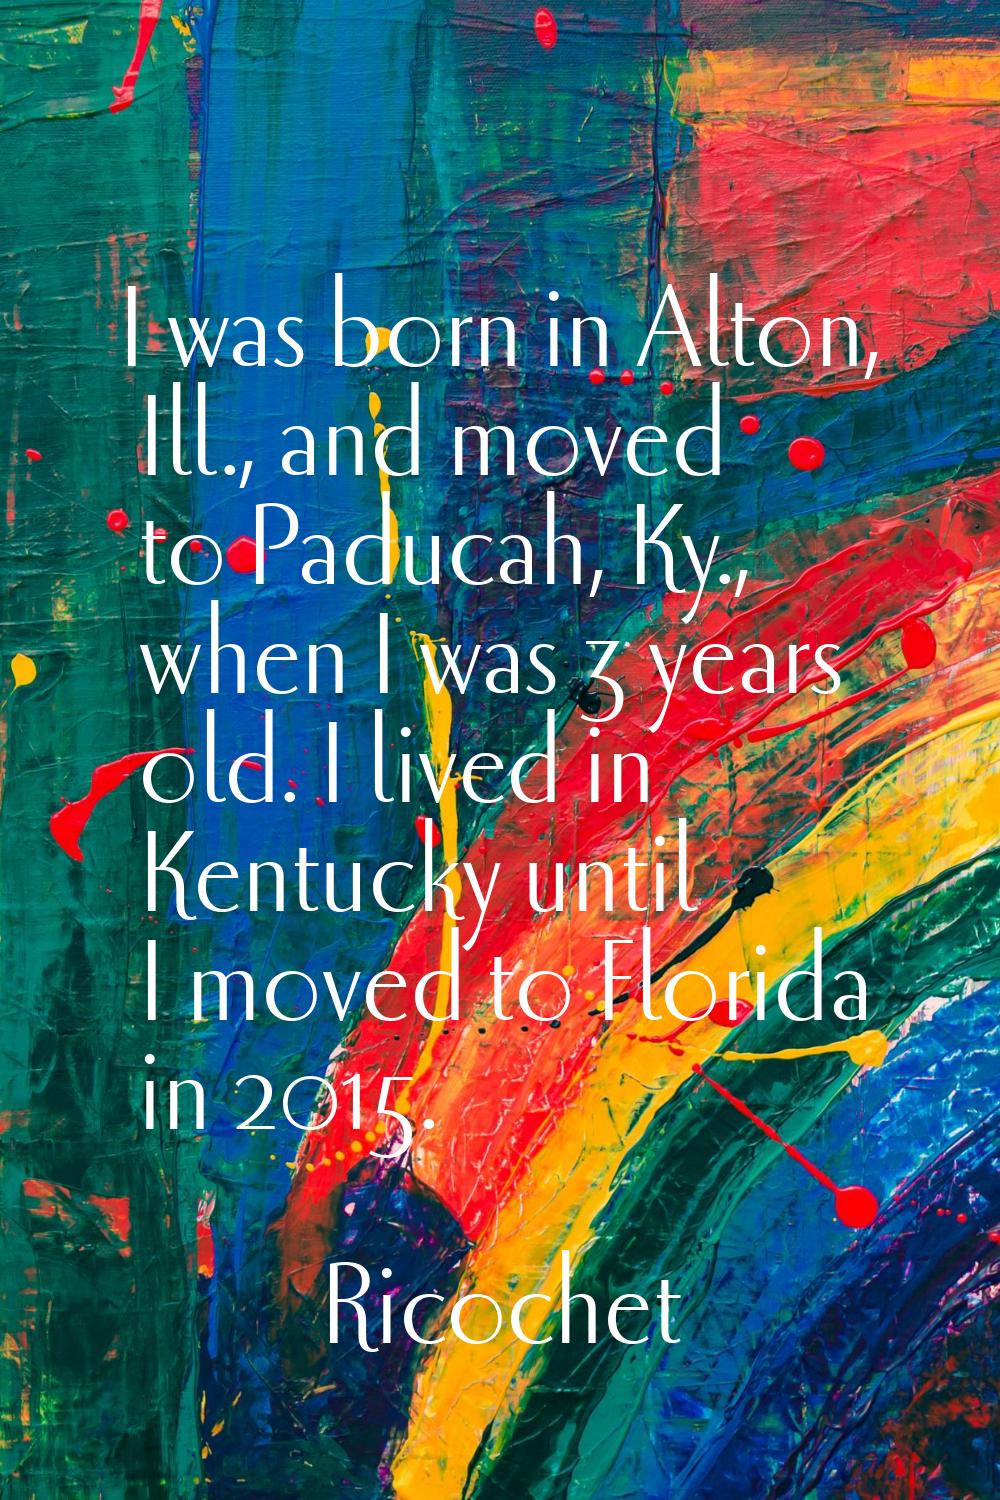 I was born in Alton, Ill., and moved to Paducah, Ky., when I was 3 years old. I lived in Kentucky u